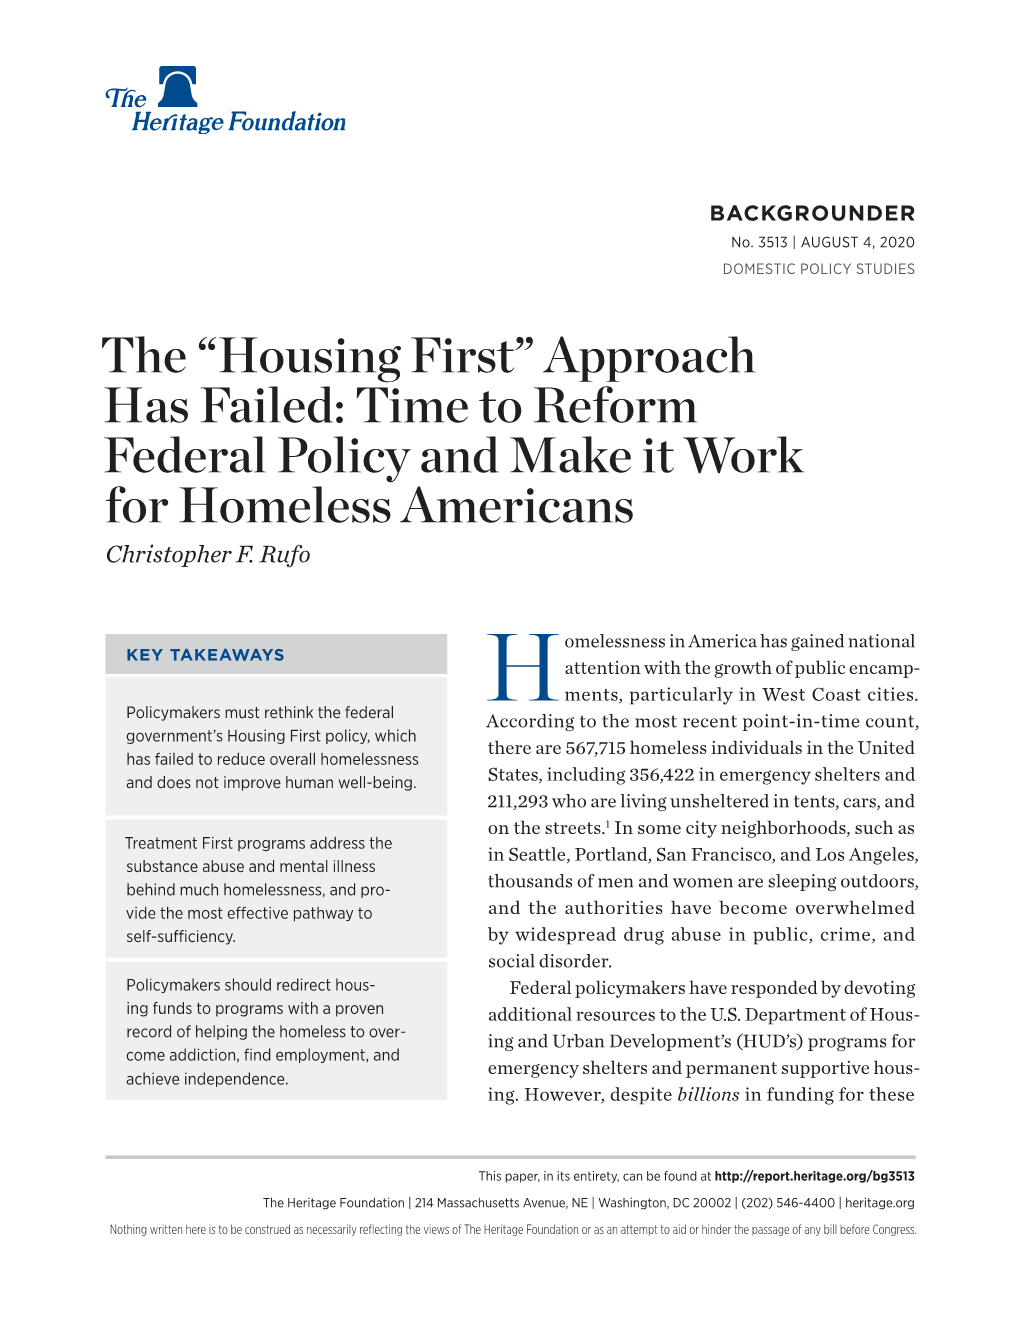 Housing First” Approach Has Failed: Time to Reform Federal Policy and Make It Work for Homeless Americans Christopher F